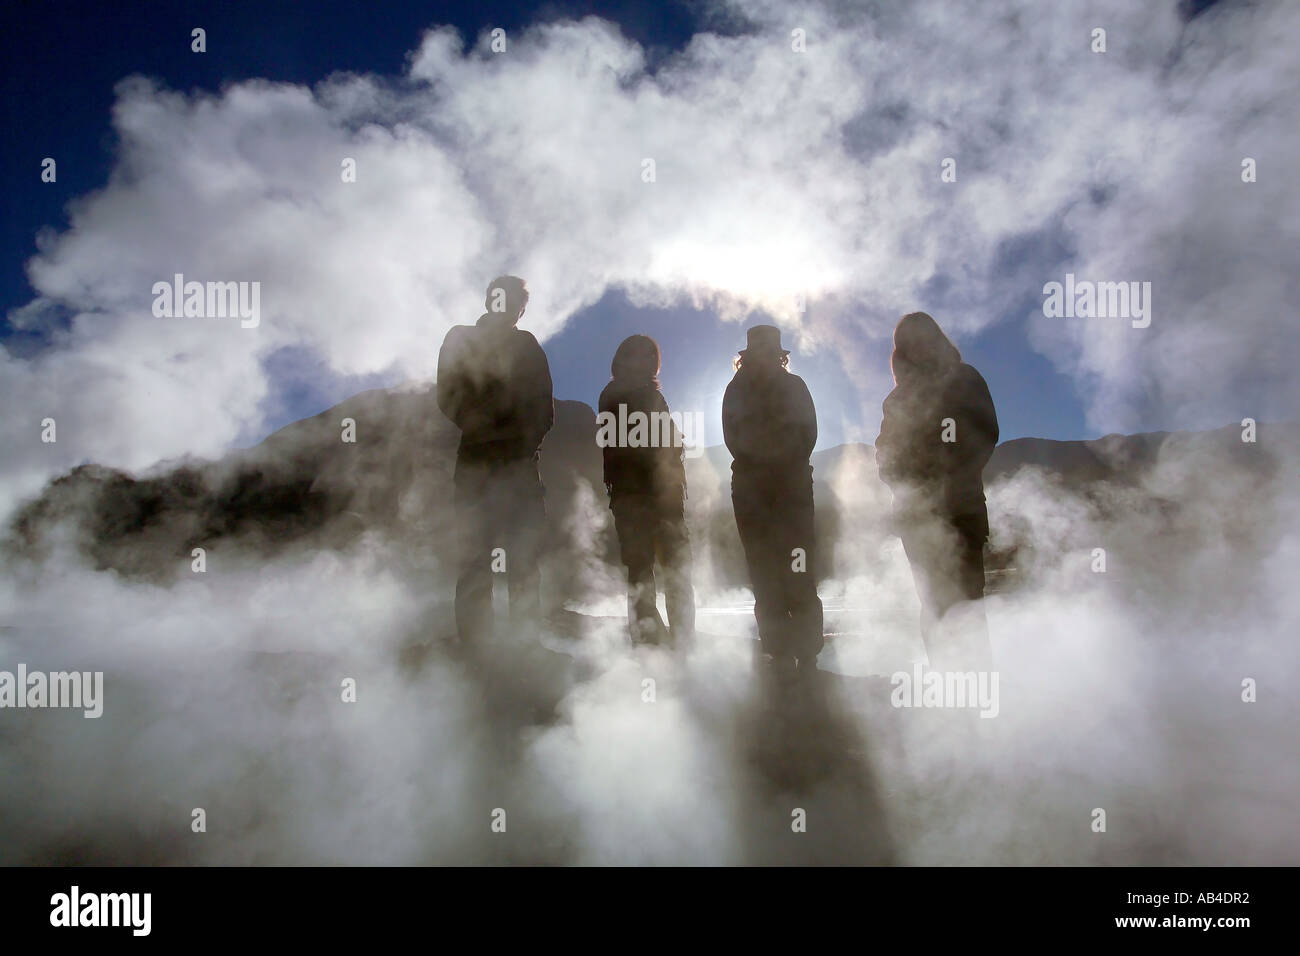 Four tourists silhouetted among the steam from the geysers at El Tatio in the early morning sun. Stock Photo